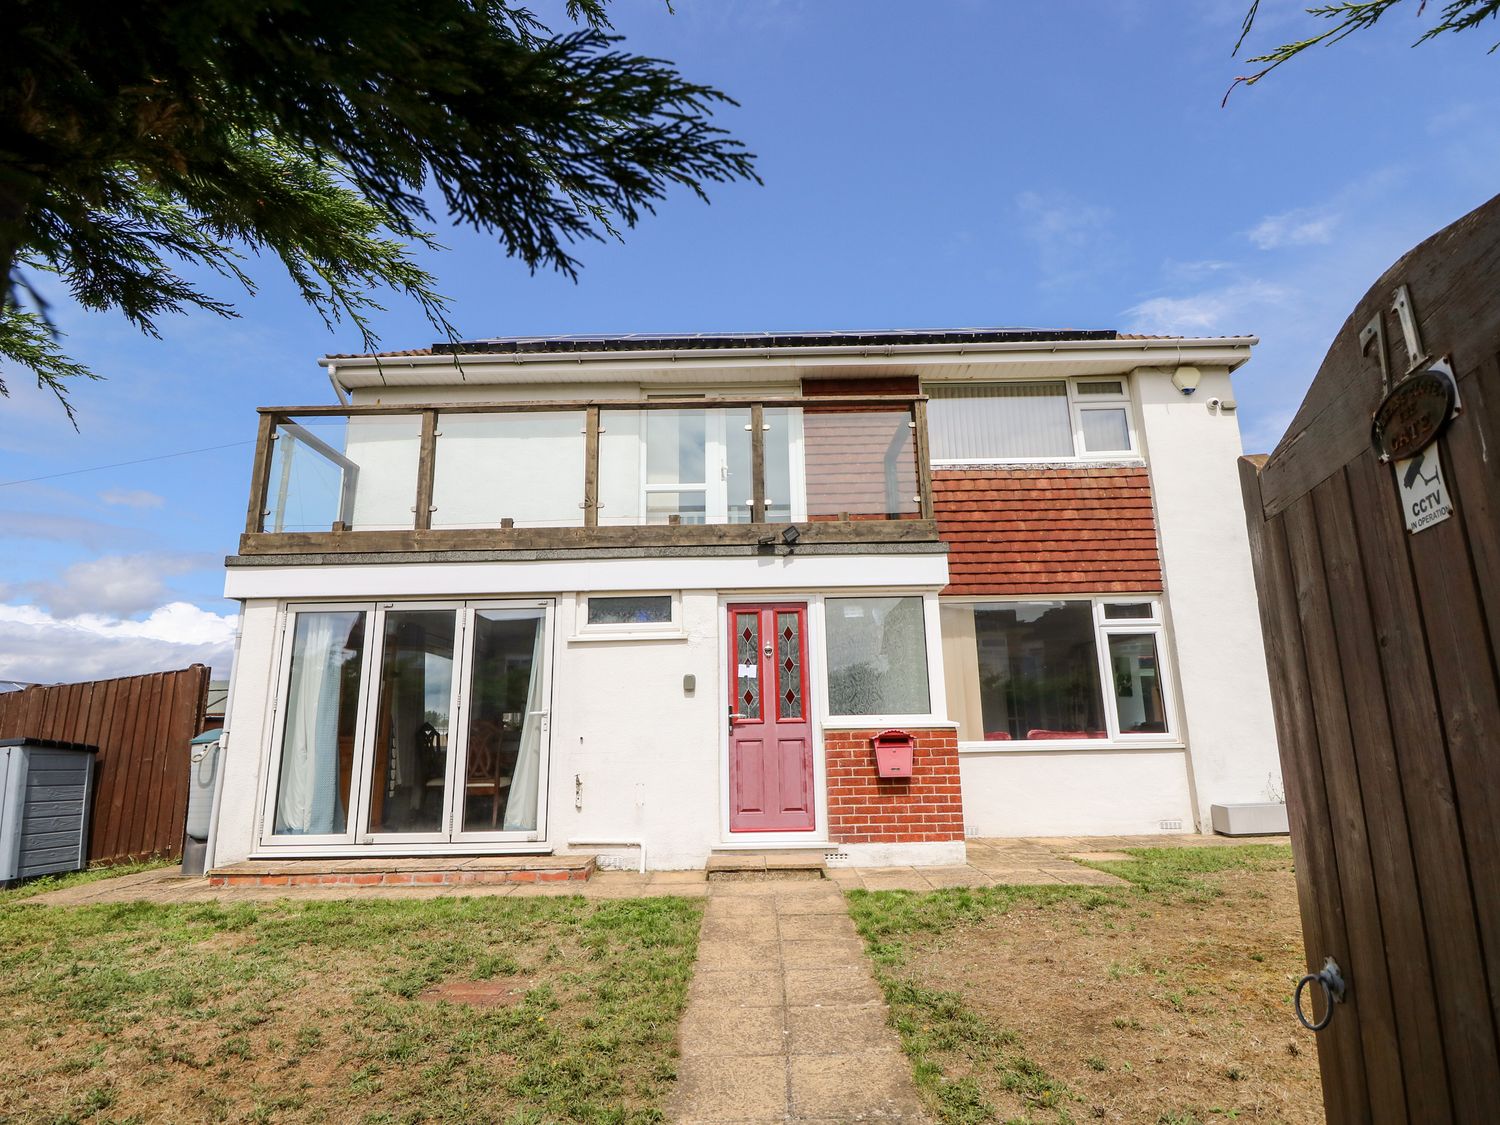 71 Southwood Road, Hayling Island, dog-friendly, close to beach, hot tub, enclosed garden, 4-bedroom